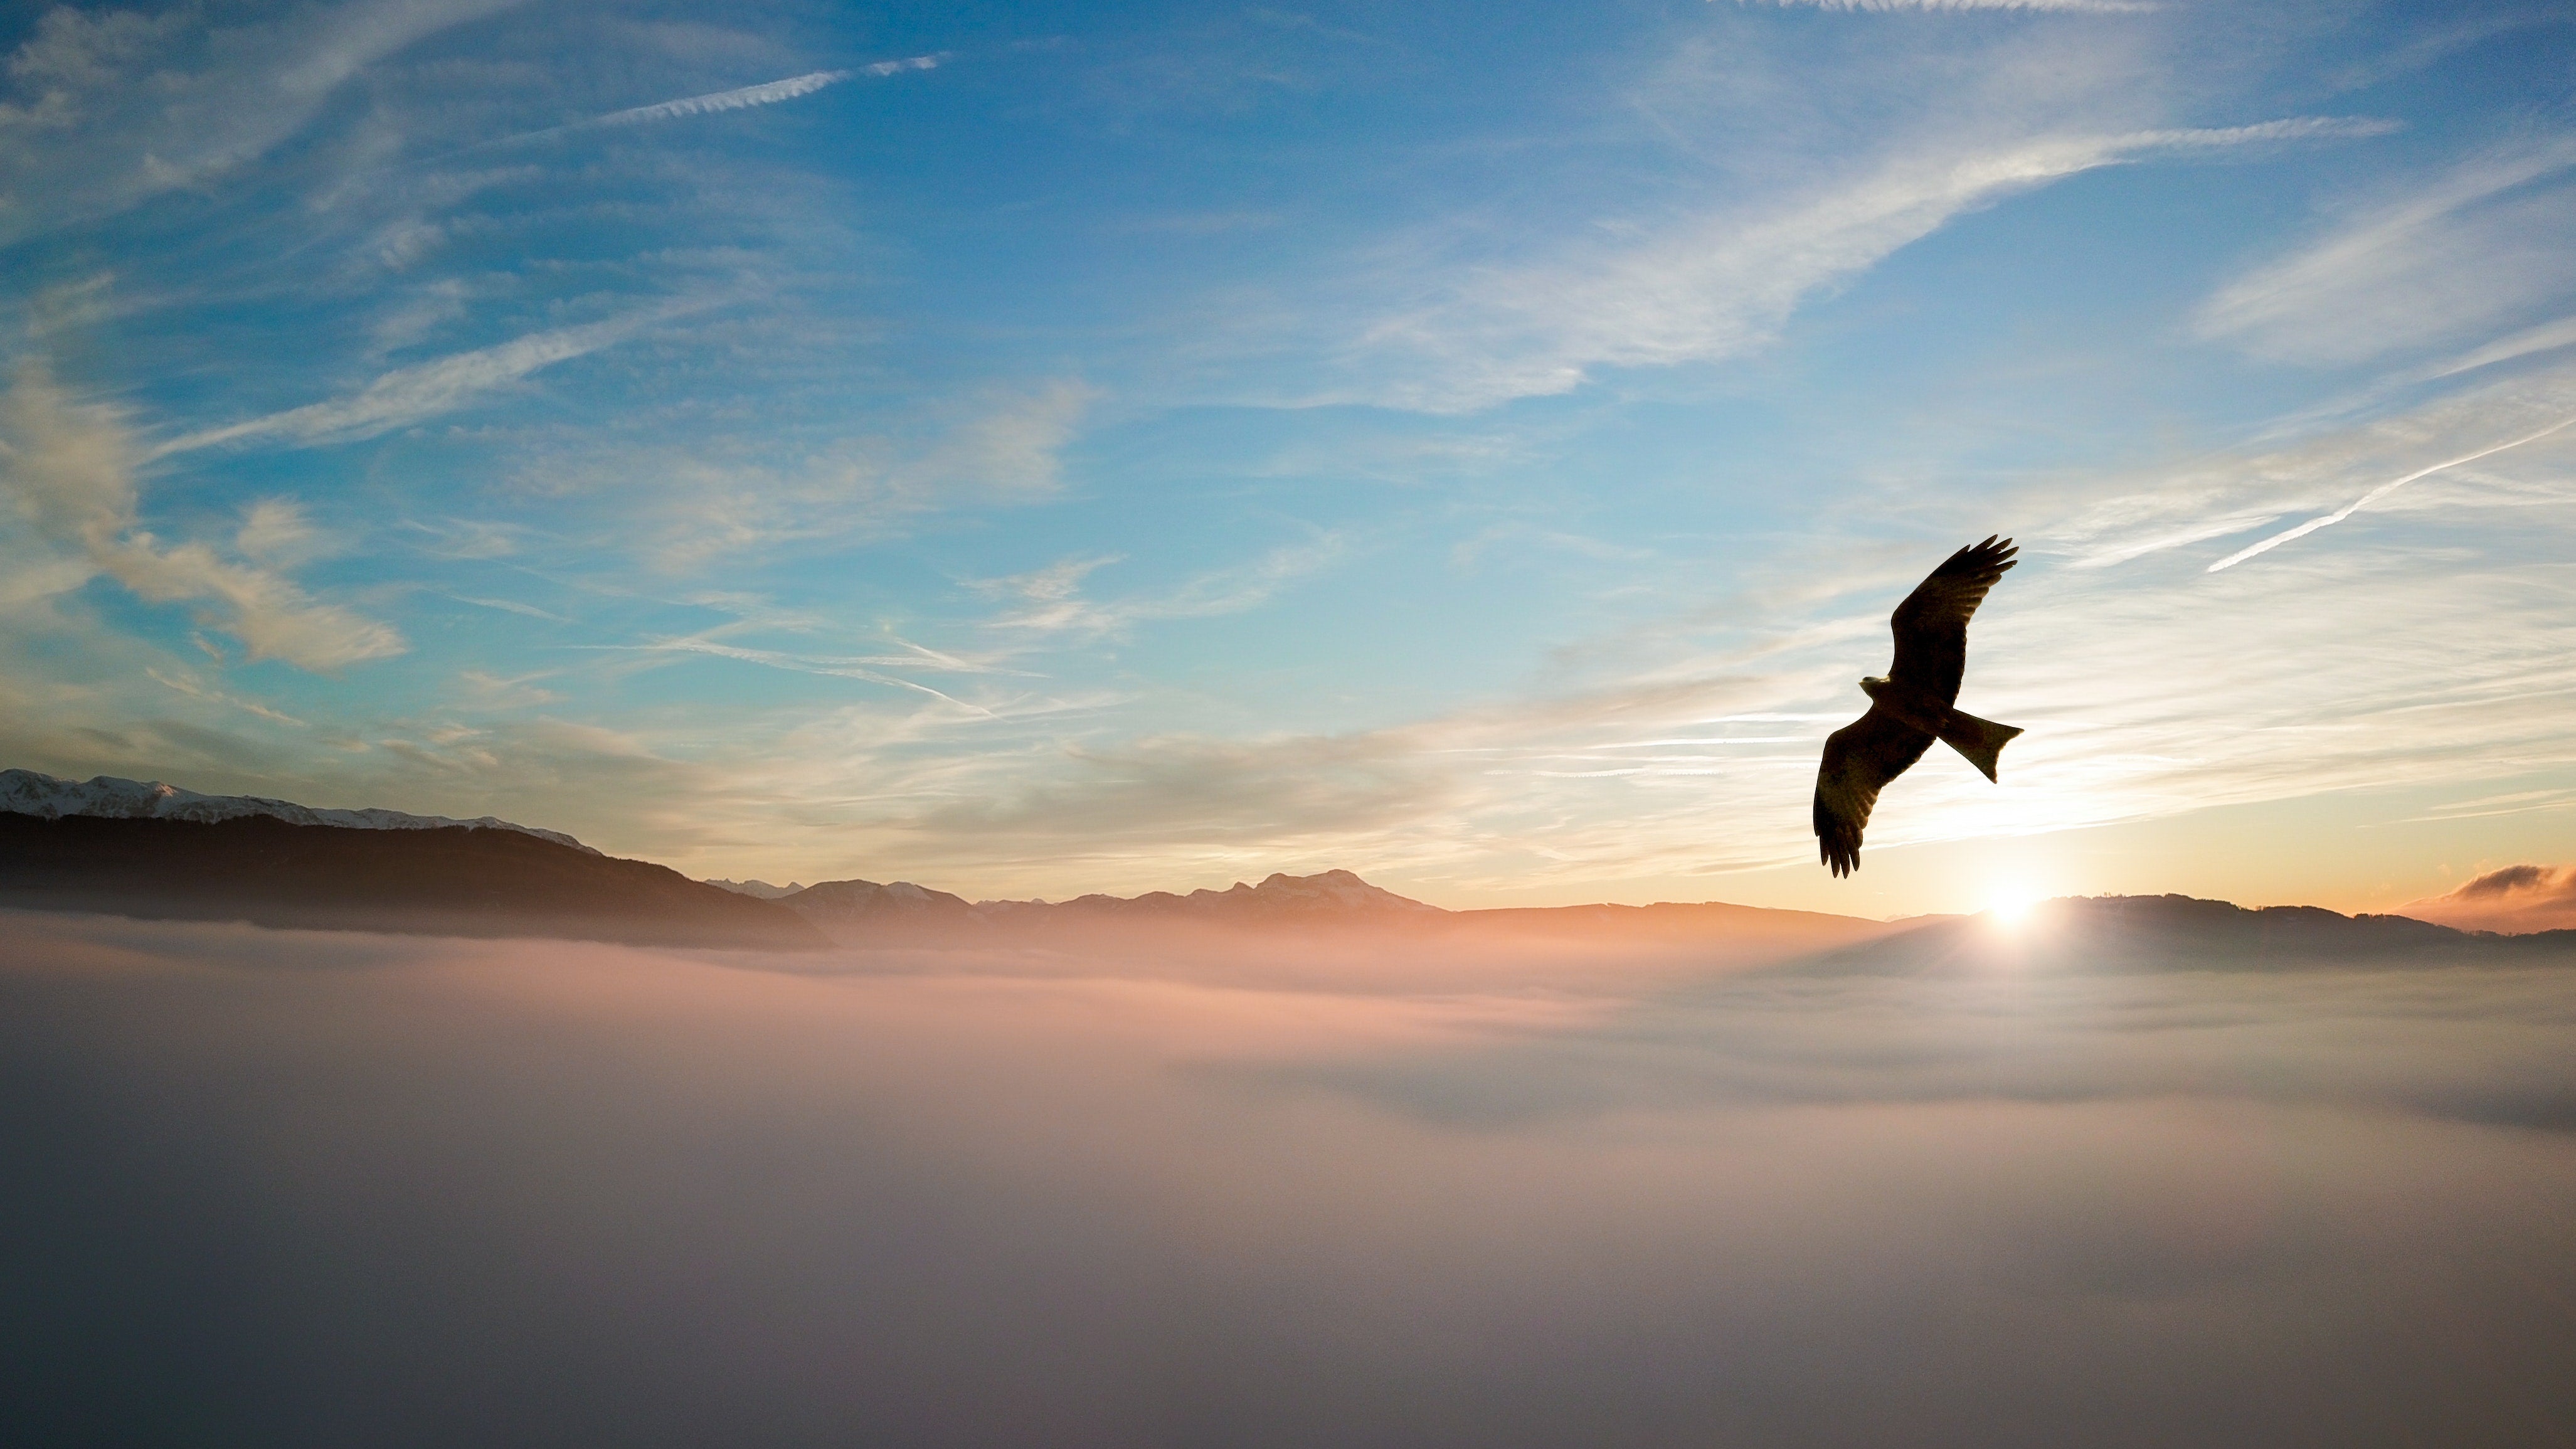 Eagle souring above the clouds with mountain peaks kissing a blue sky horizon.